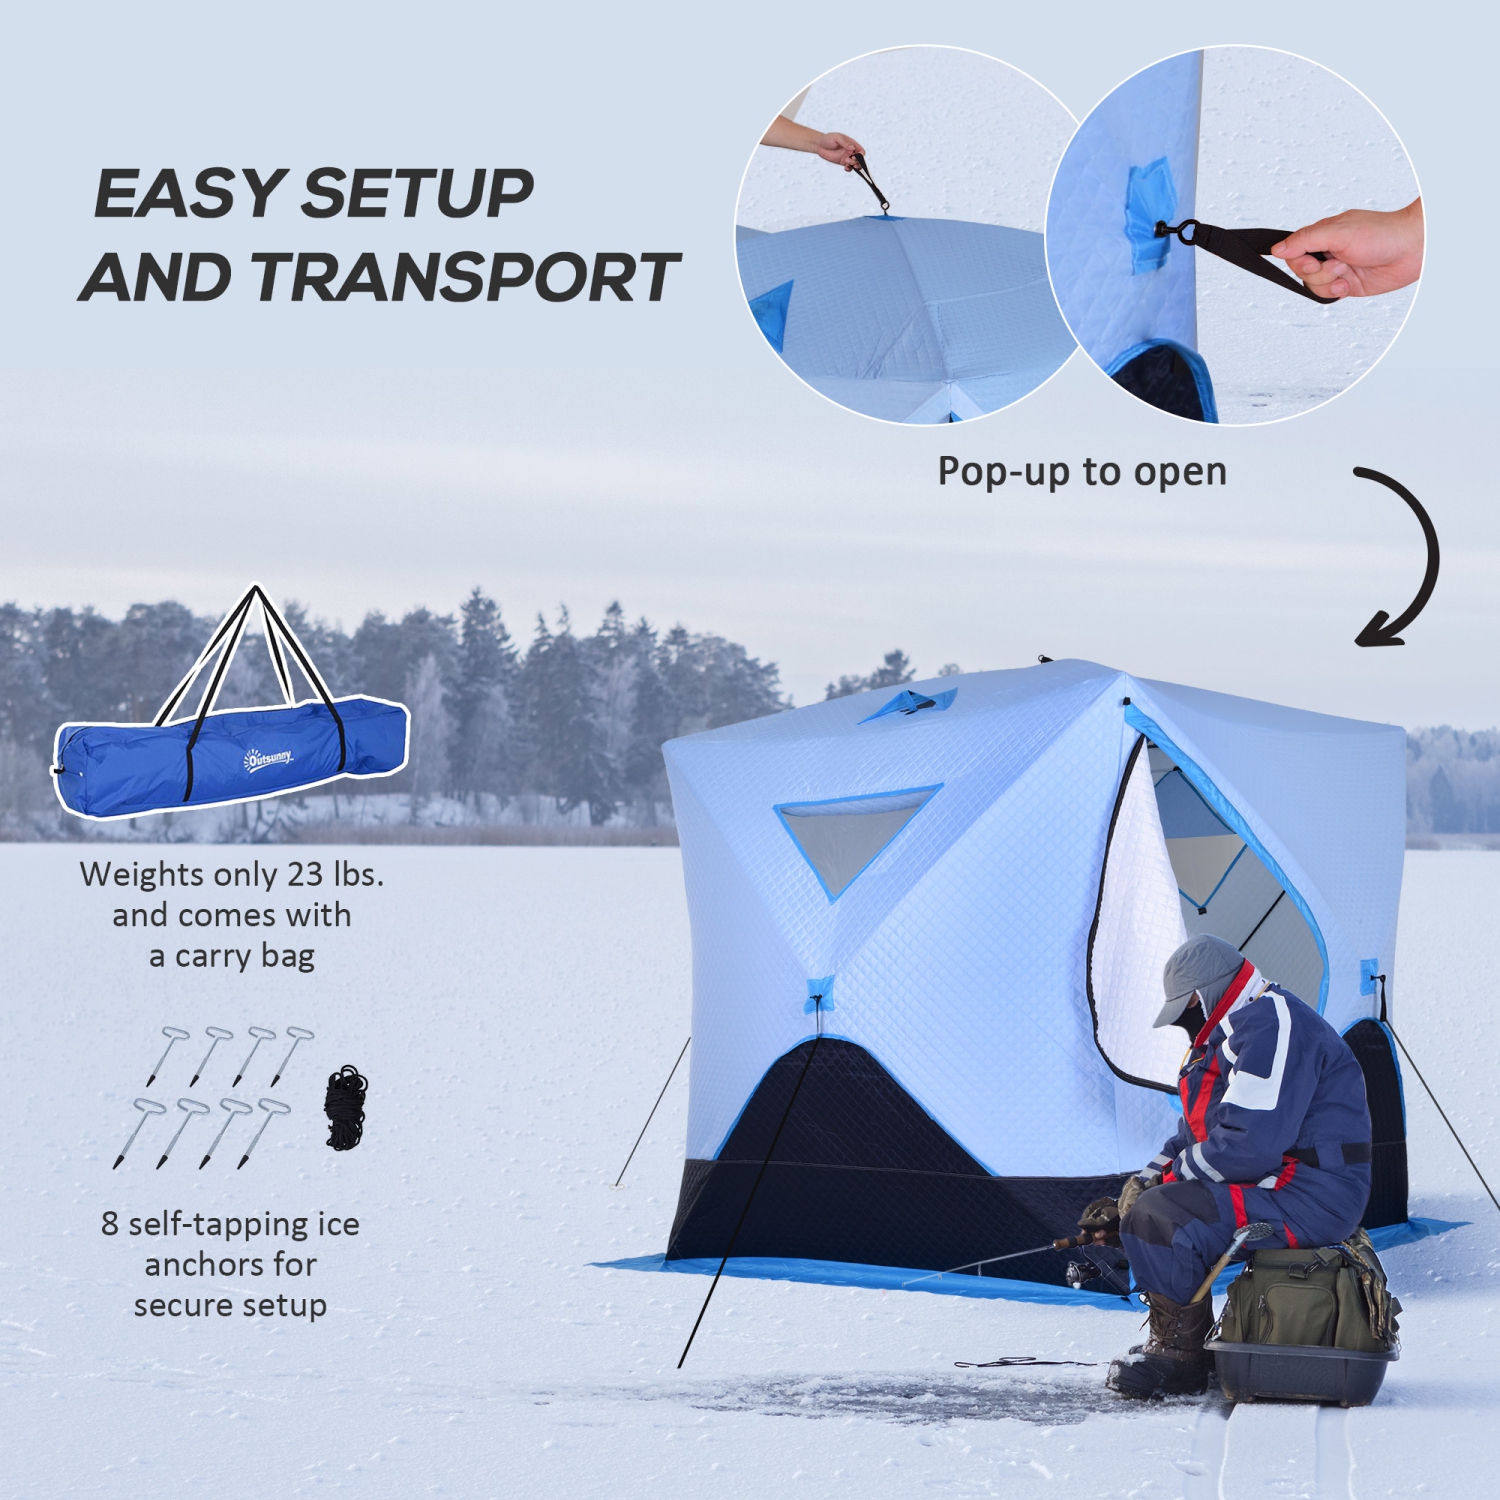 Outsunny 4-Person Pop-up Ice Fishing Tent, Insulated Ice Fishing Shelter  with Ventilation Windows, Double Doors and Carry Bag, for Low-Temp -22℉